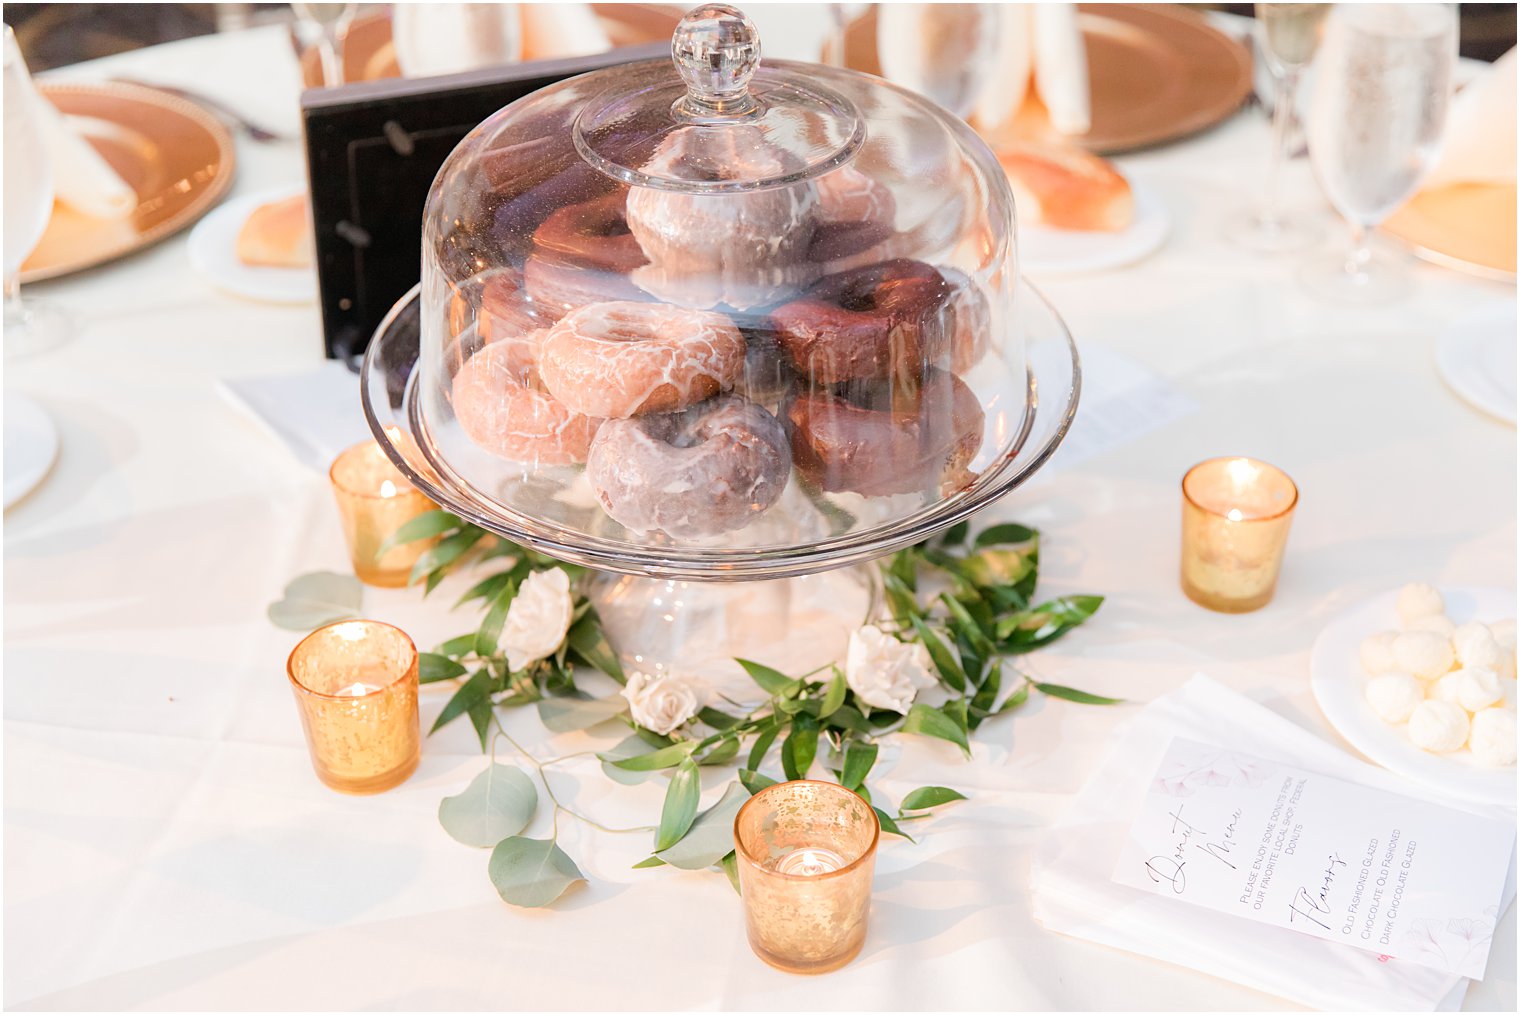 donuts sit on cake stand in center of table at reception at the Ballroom at the Ben